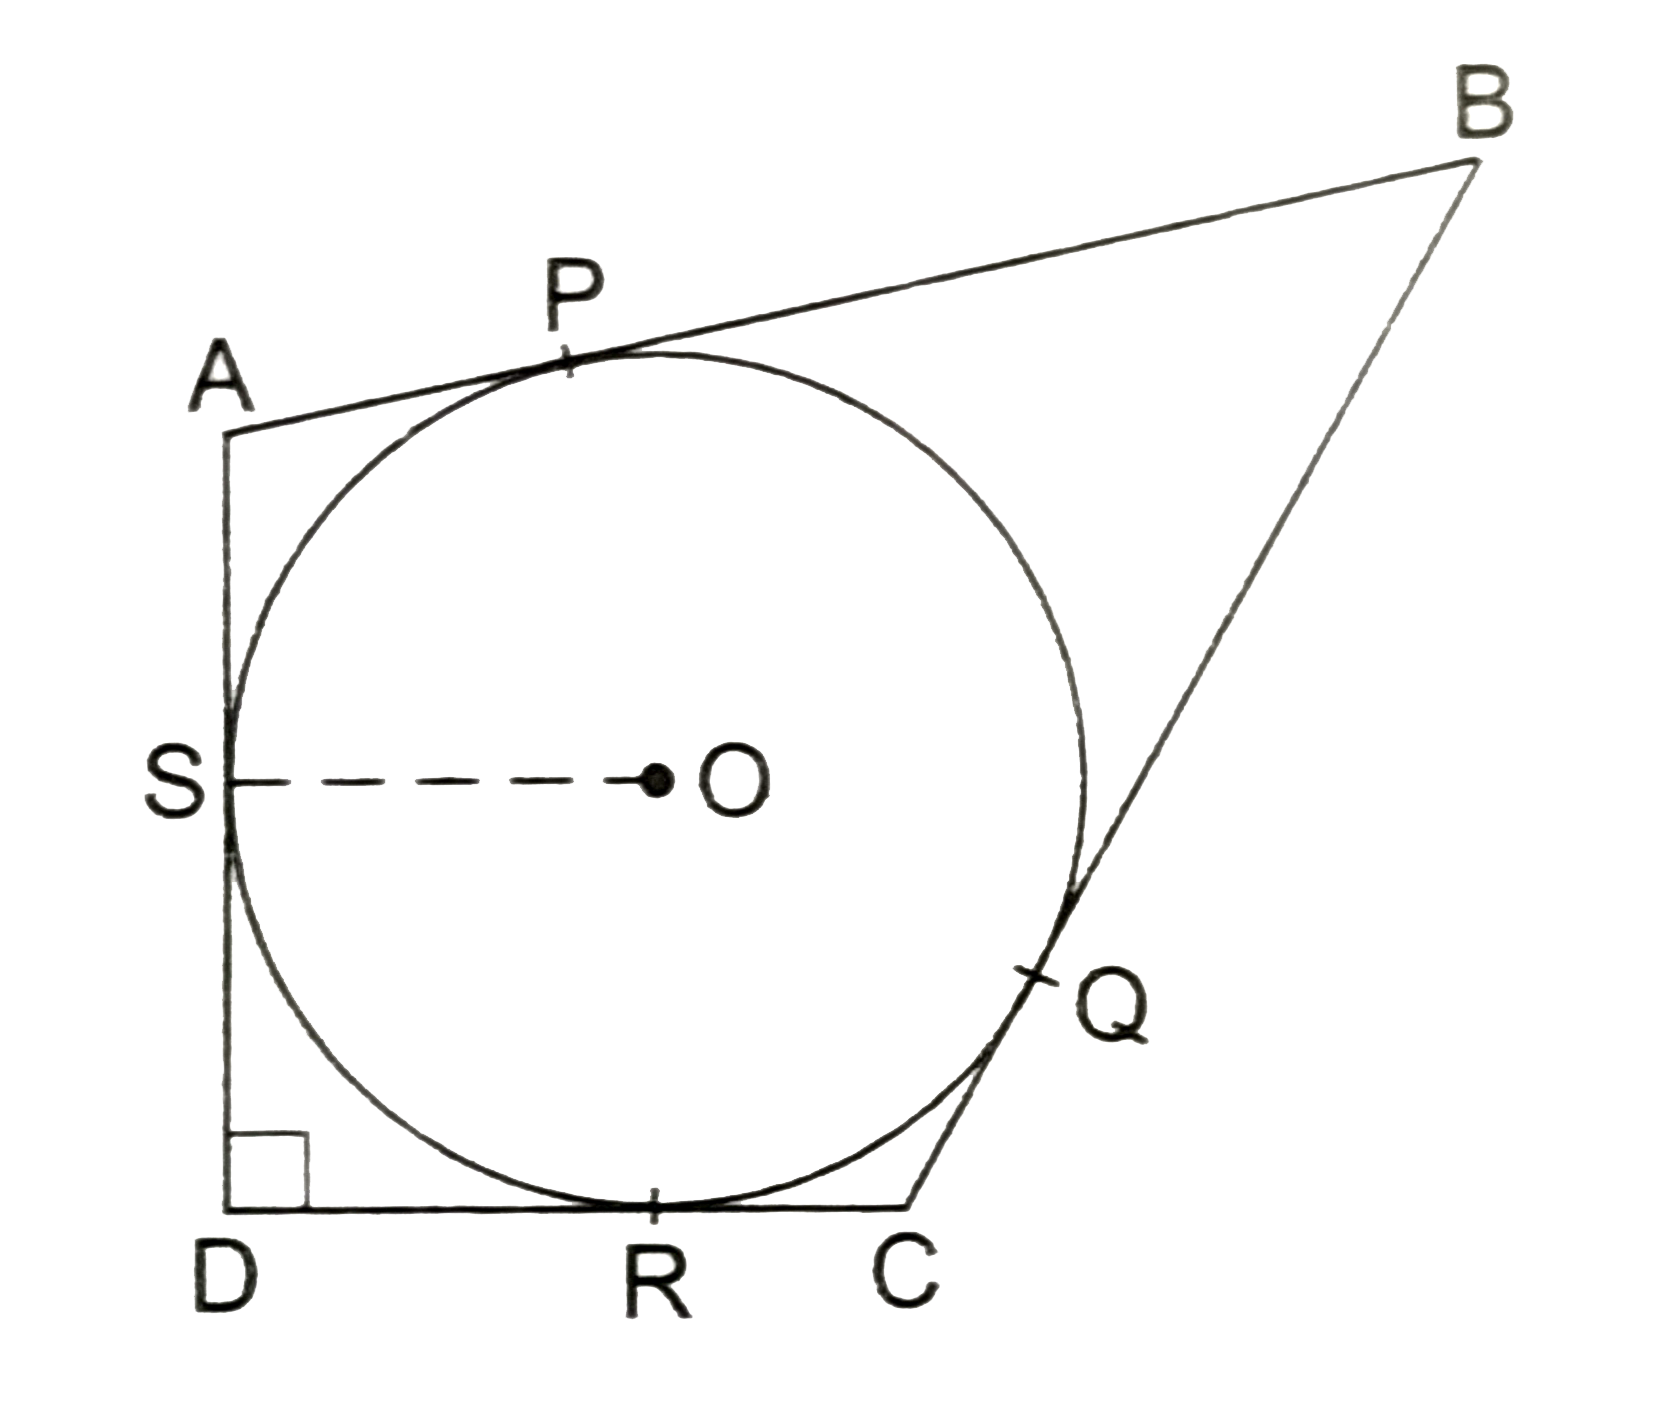 In the given figure, a circle is inscribed in a quadrilateral ABCD touching its sides AB, BC, CD and AD at P,Q,R and S respectively. If the radius of the circle is 10cm, BC=38cm, PB=27cm and ADbotCD then the length of CD is